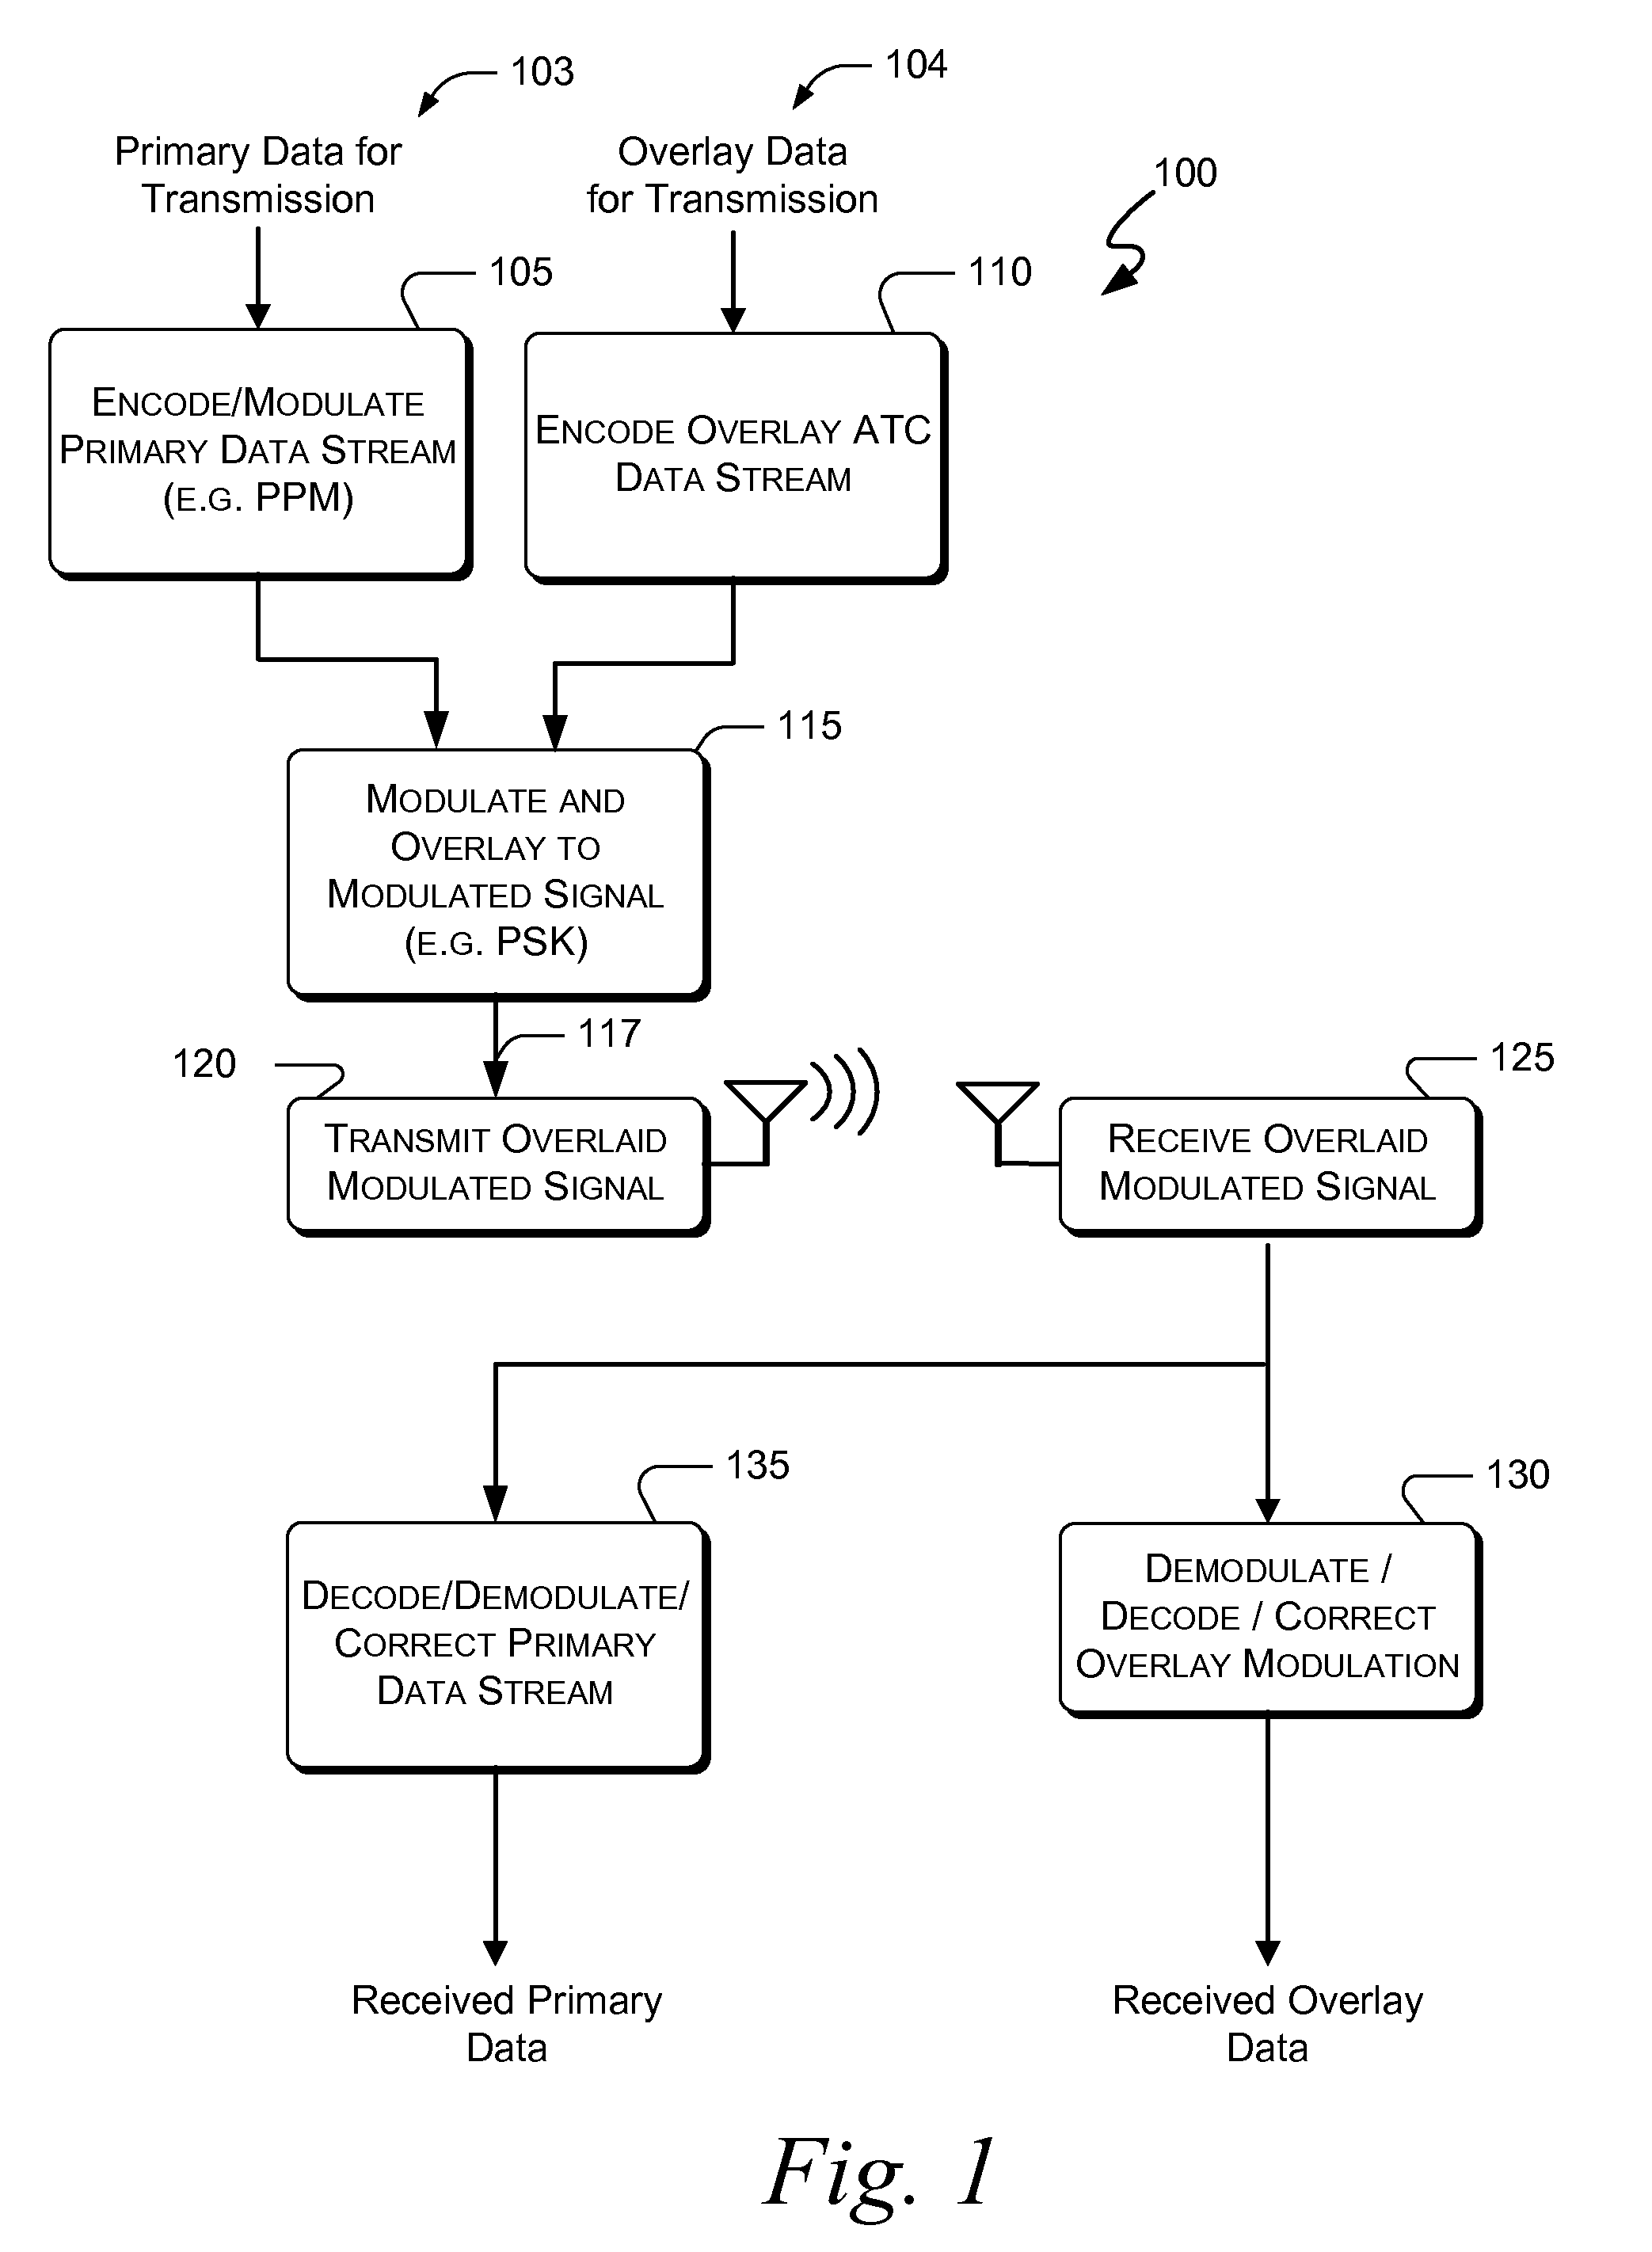 Systems and methods for providing an advanced ATC data link